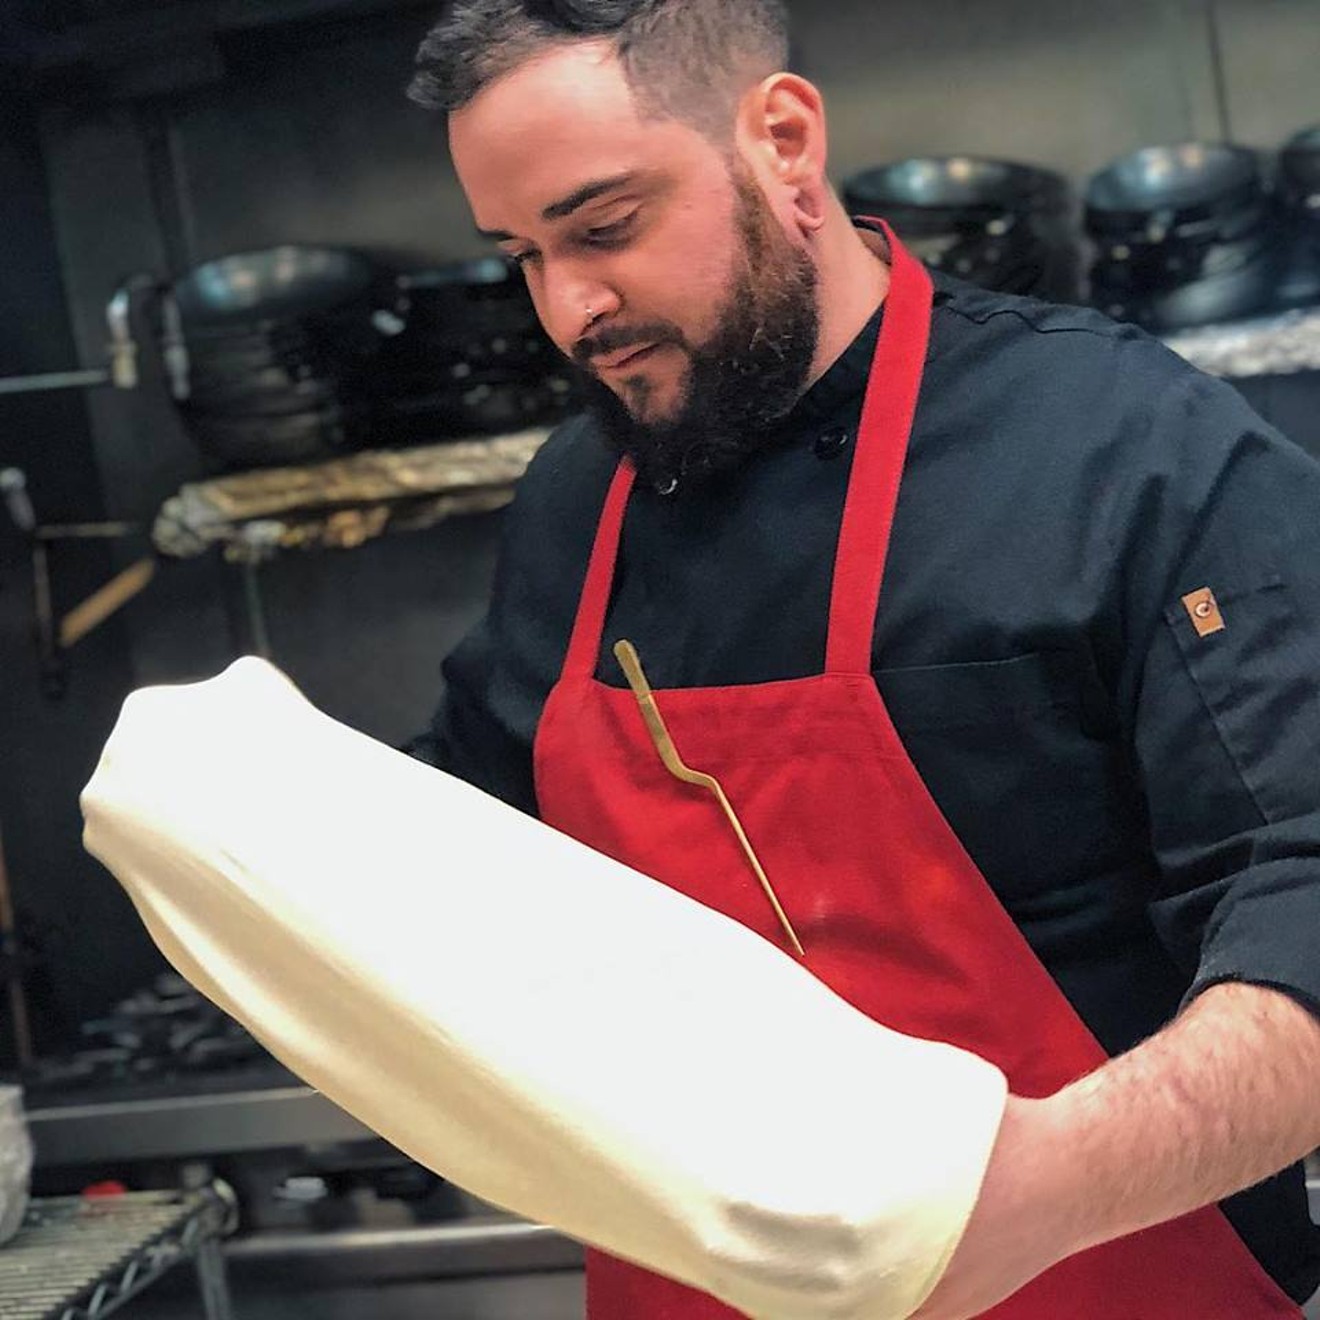 Chef Blake Carini takes the helm at Luca.